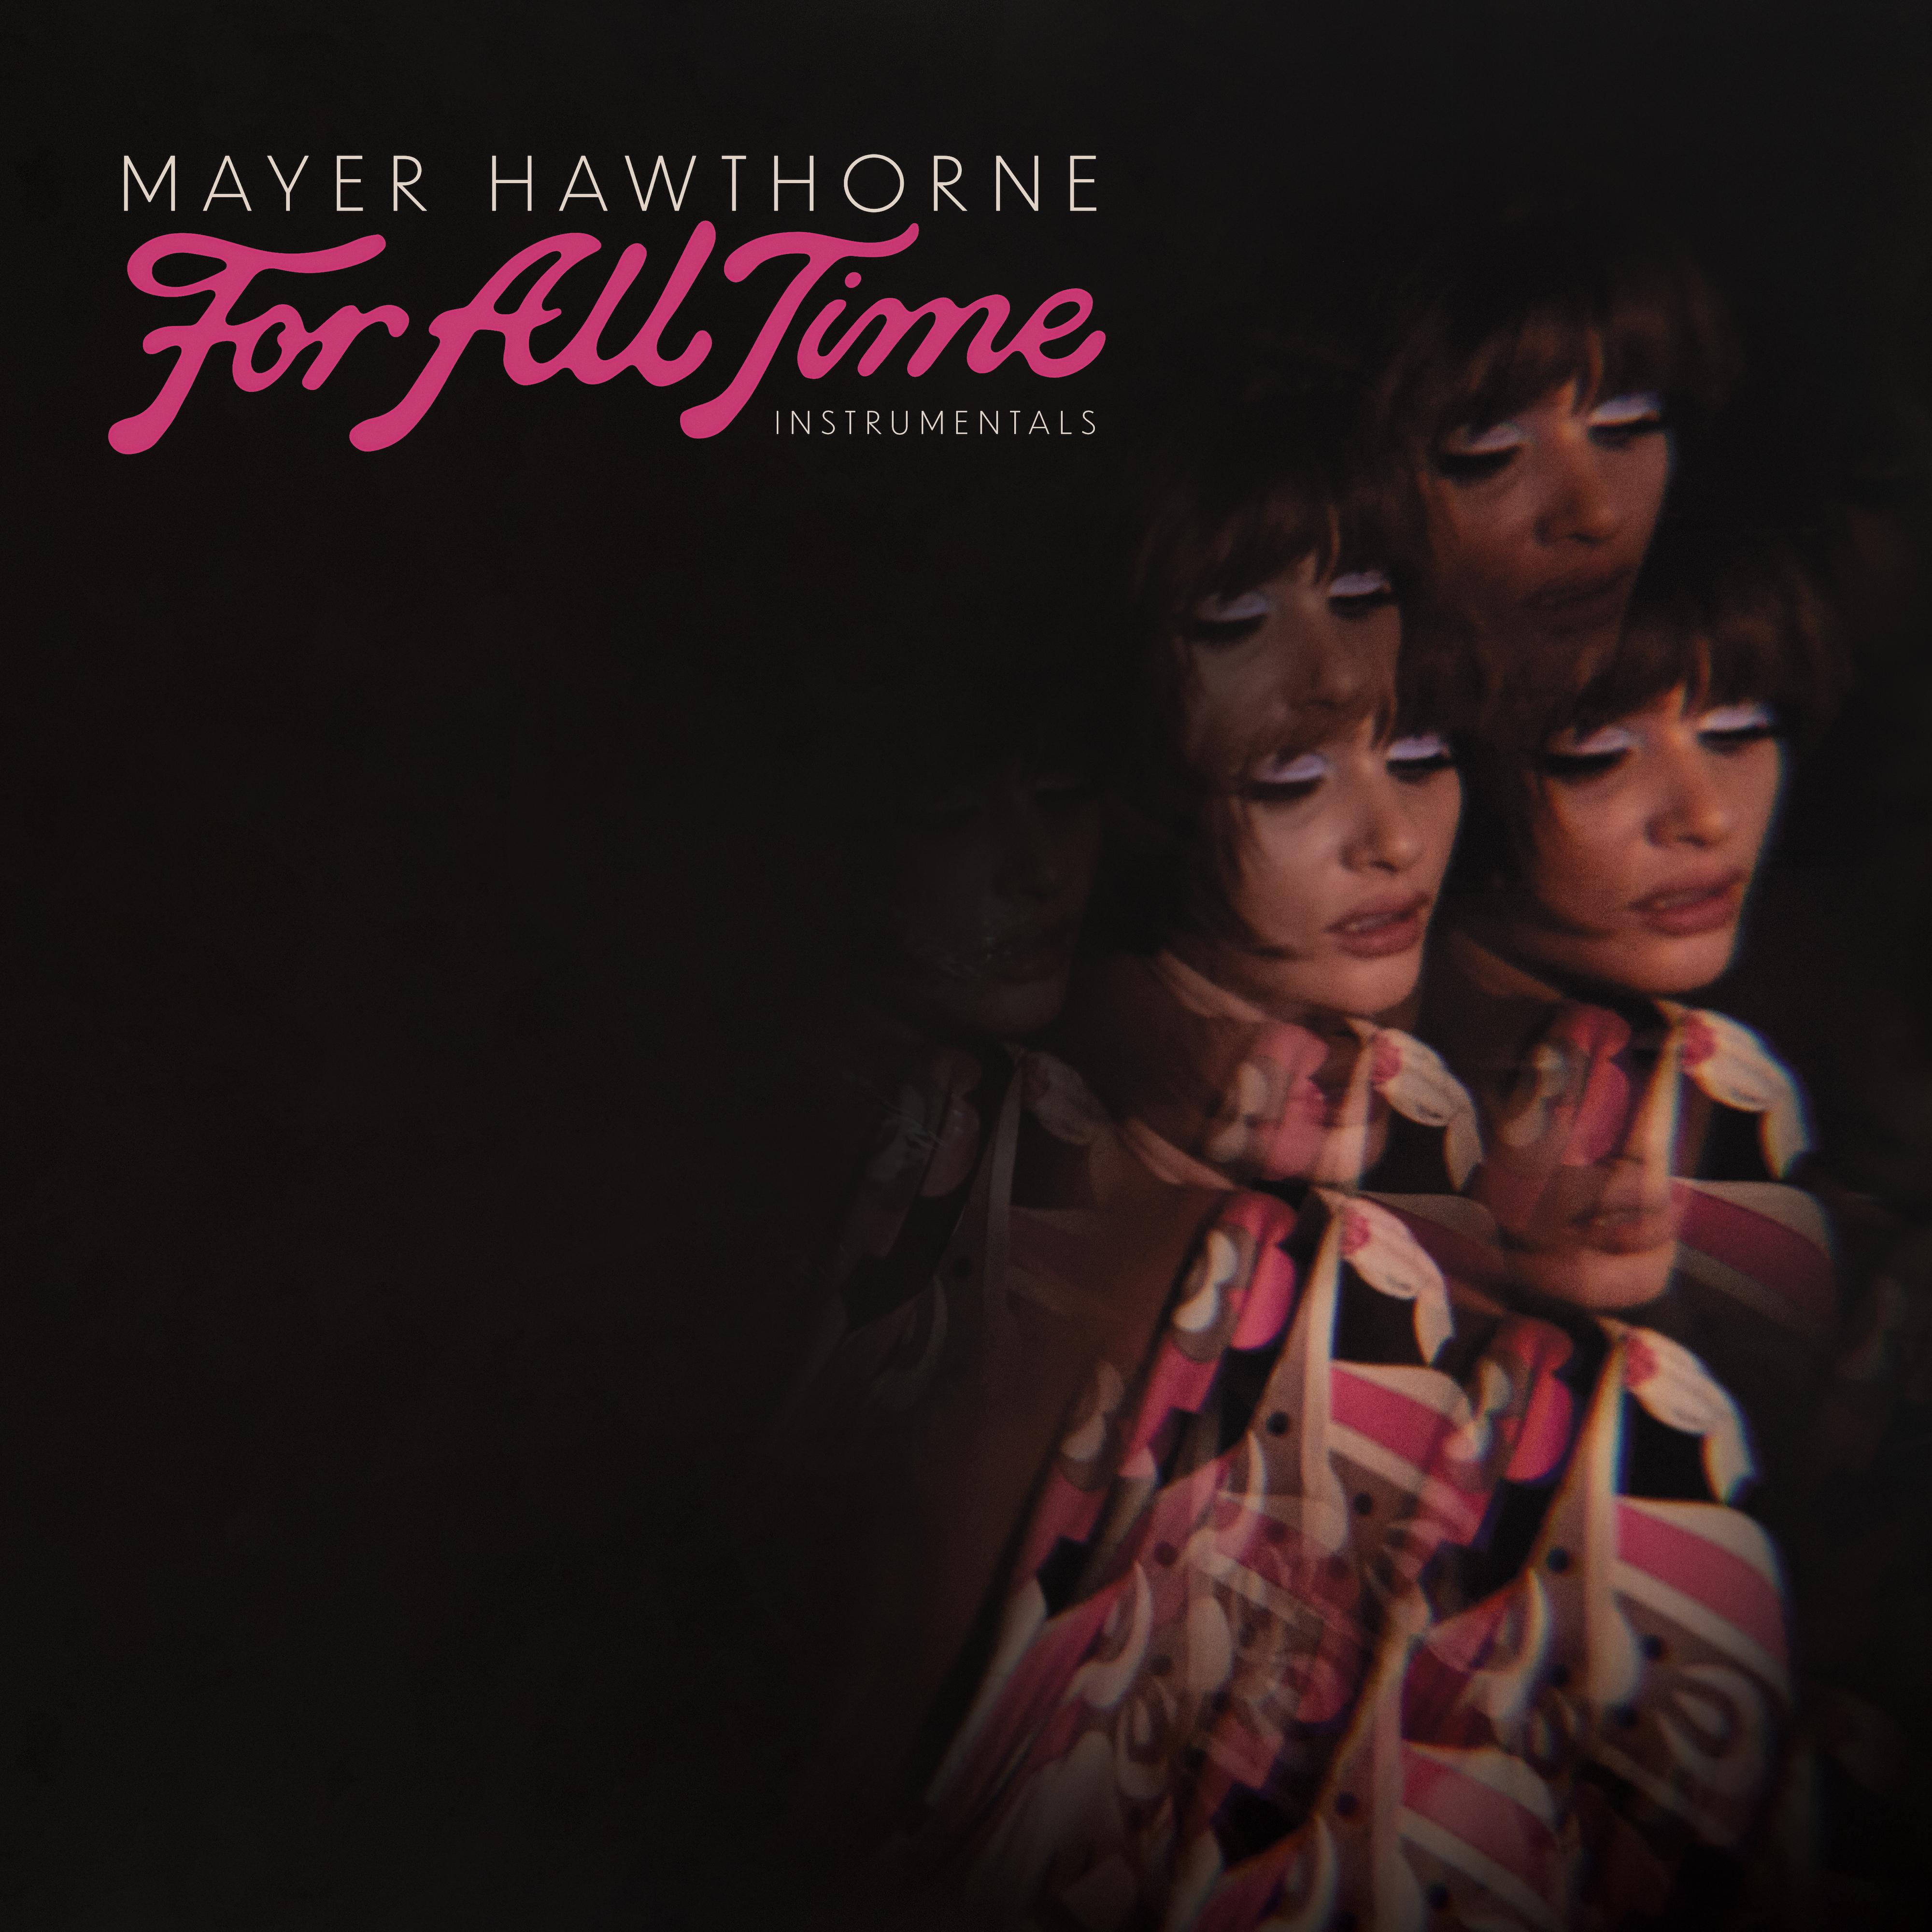 Mayer Hawthorne - For All Time Instrumental